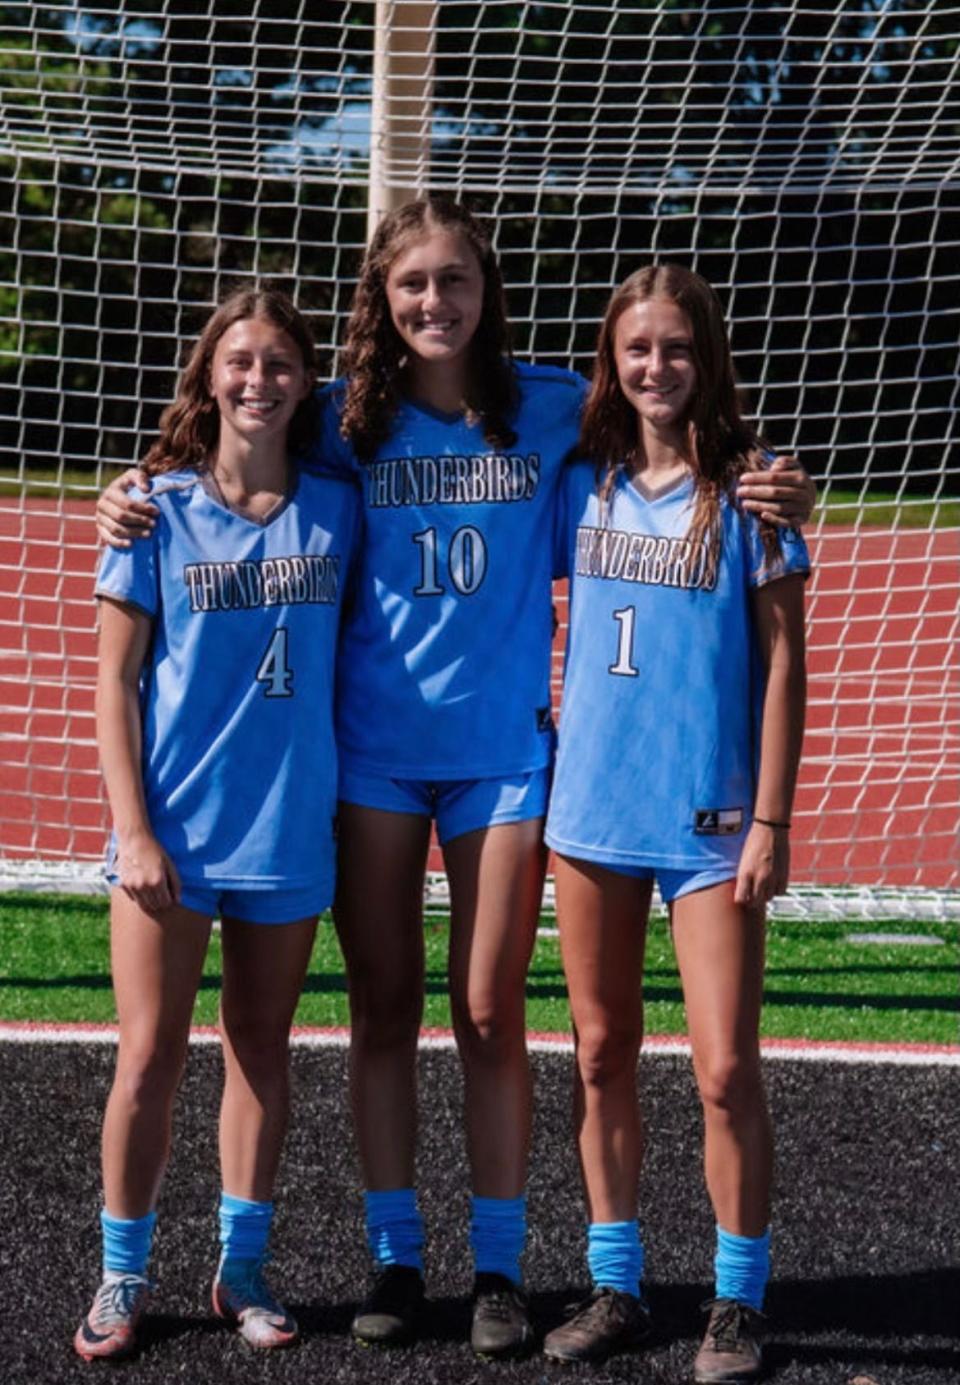 Mahwah’s Taylor Tremblay (4), Marissa LaVerghetta (10) and Devon Tremblay (1) join together in the midfield this season.